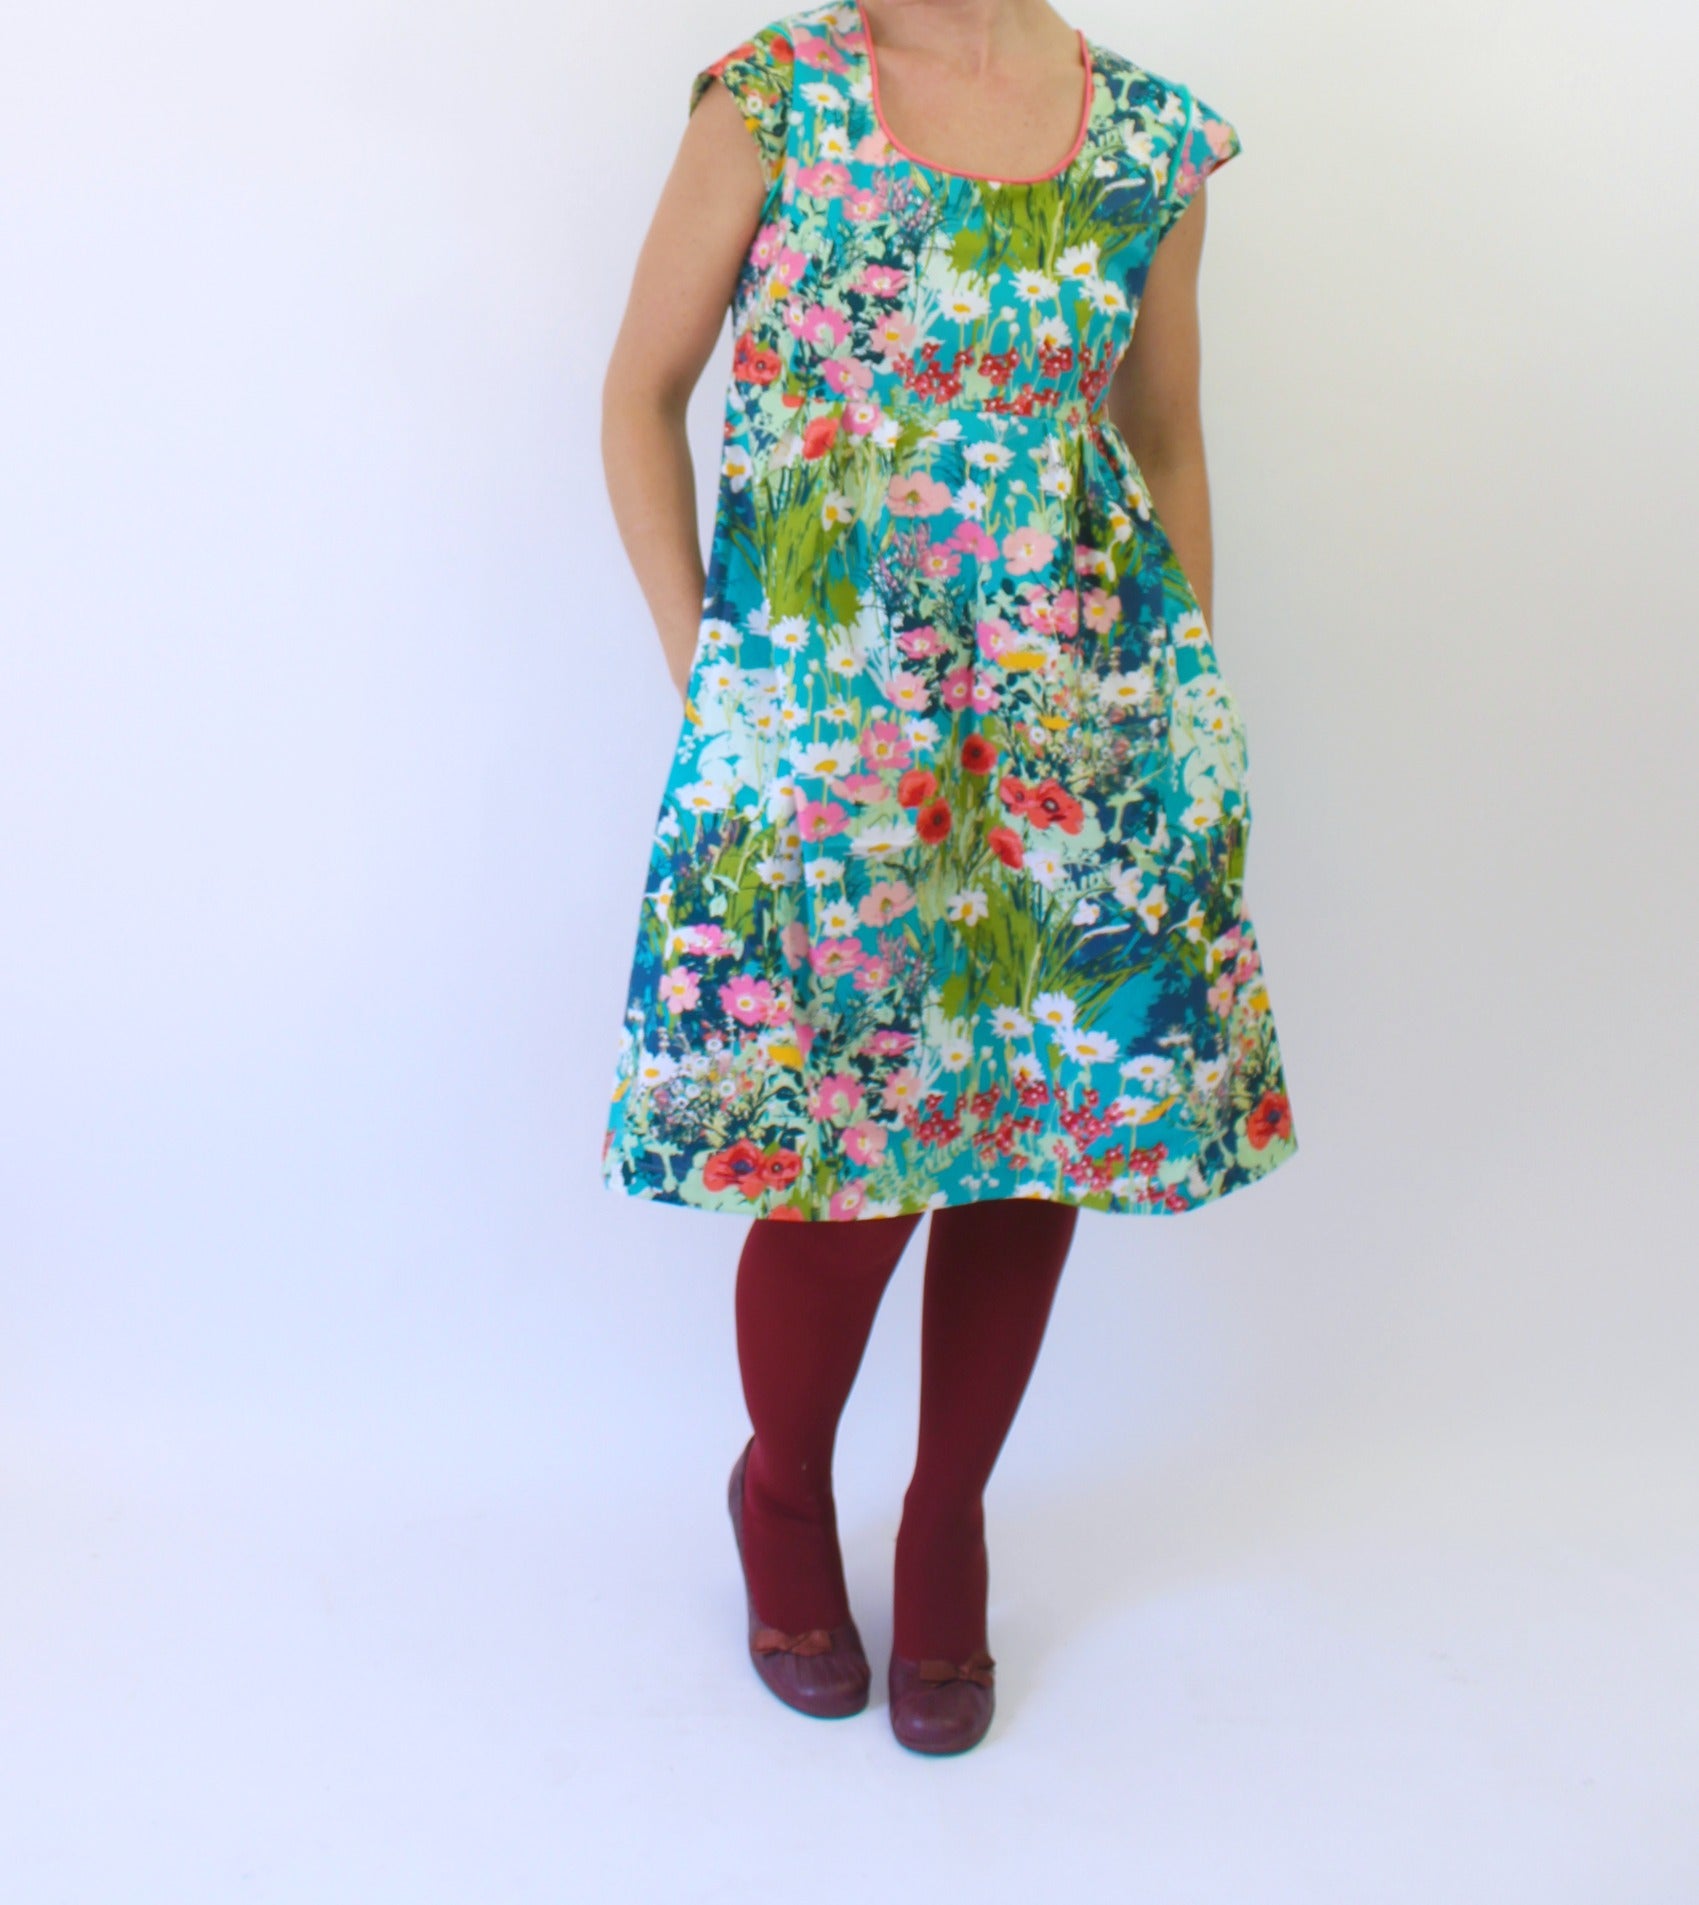 Trillium (formerly Washi) dress and top pattern Made by Rae for